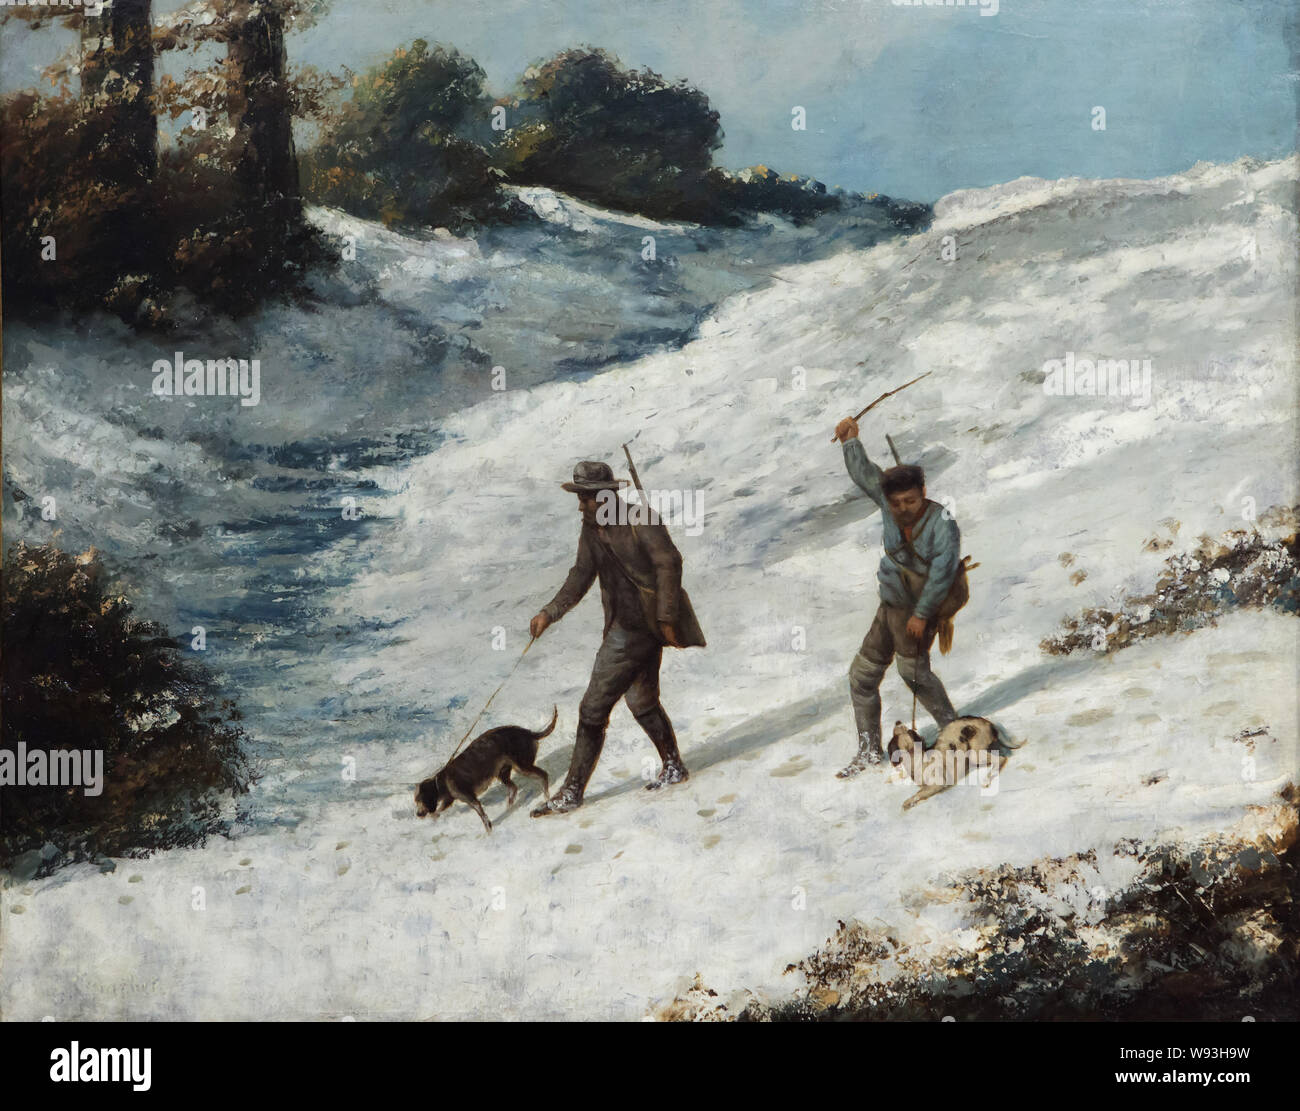 Painting 'Hunters in the snow' by French realist painter Gustave Courbet (1867) on display in the Museum of Fine Arts and Archaeology (Musée des Beaux-Arts et d'Archéologie de Besançon) in Besançon, France. Stock Photo